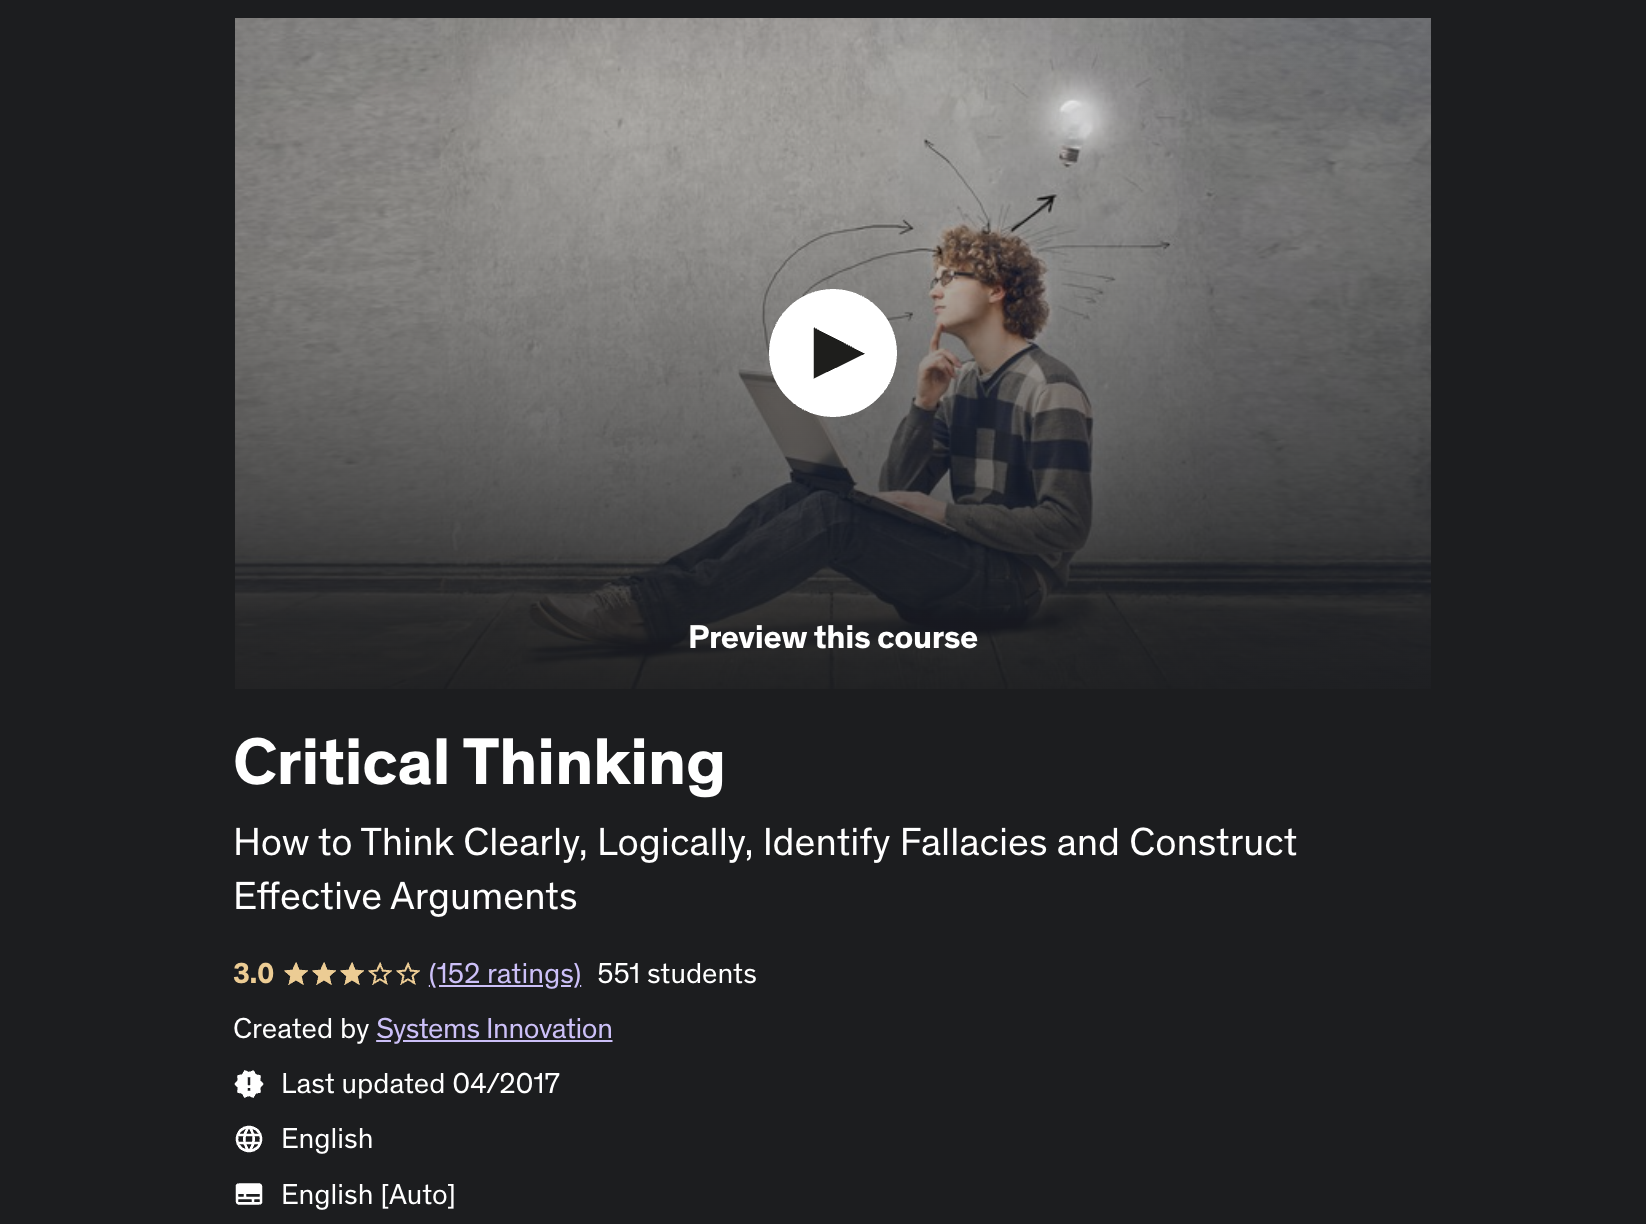 Critical Thinking with Logic